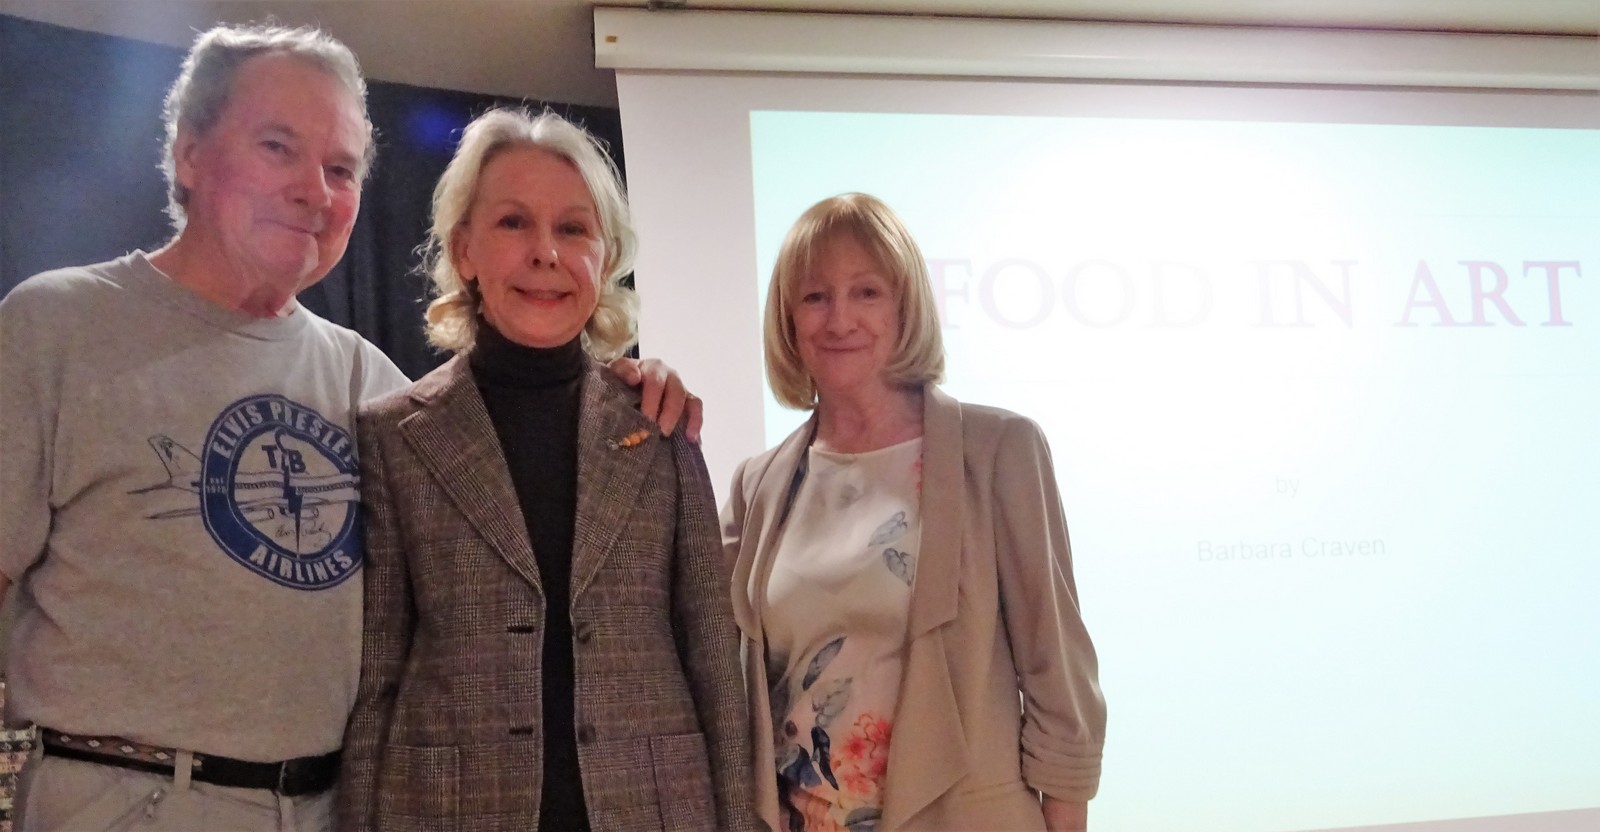 Many thanks to Barbara Craven for her very interesting presentation to the History Group on “Food in Art”